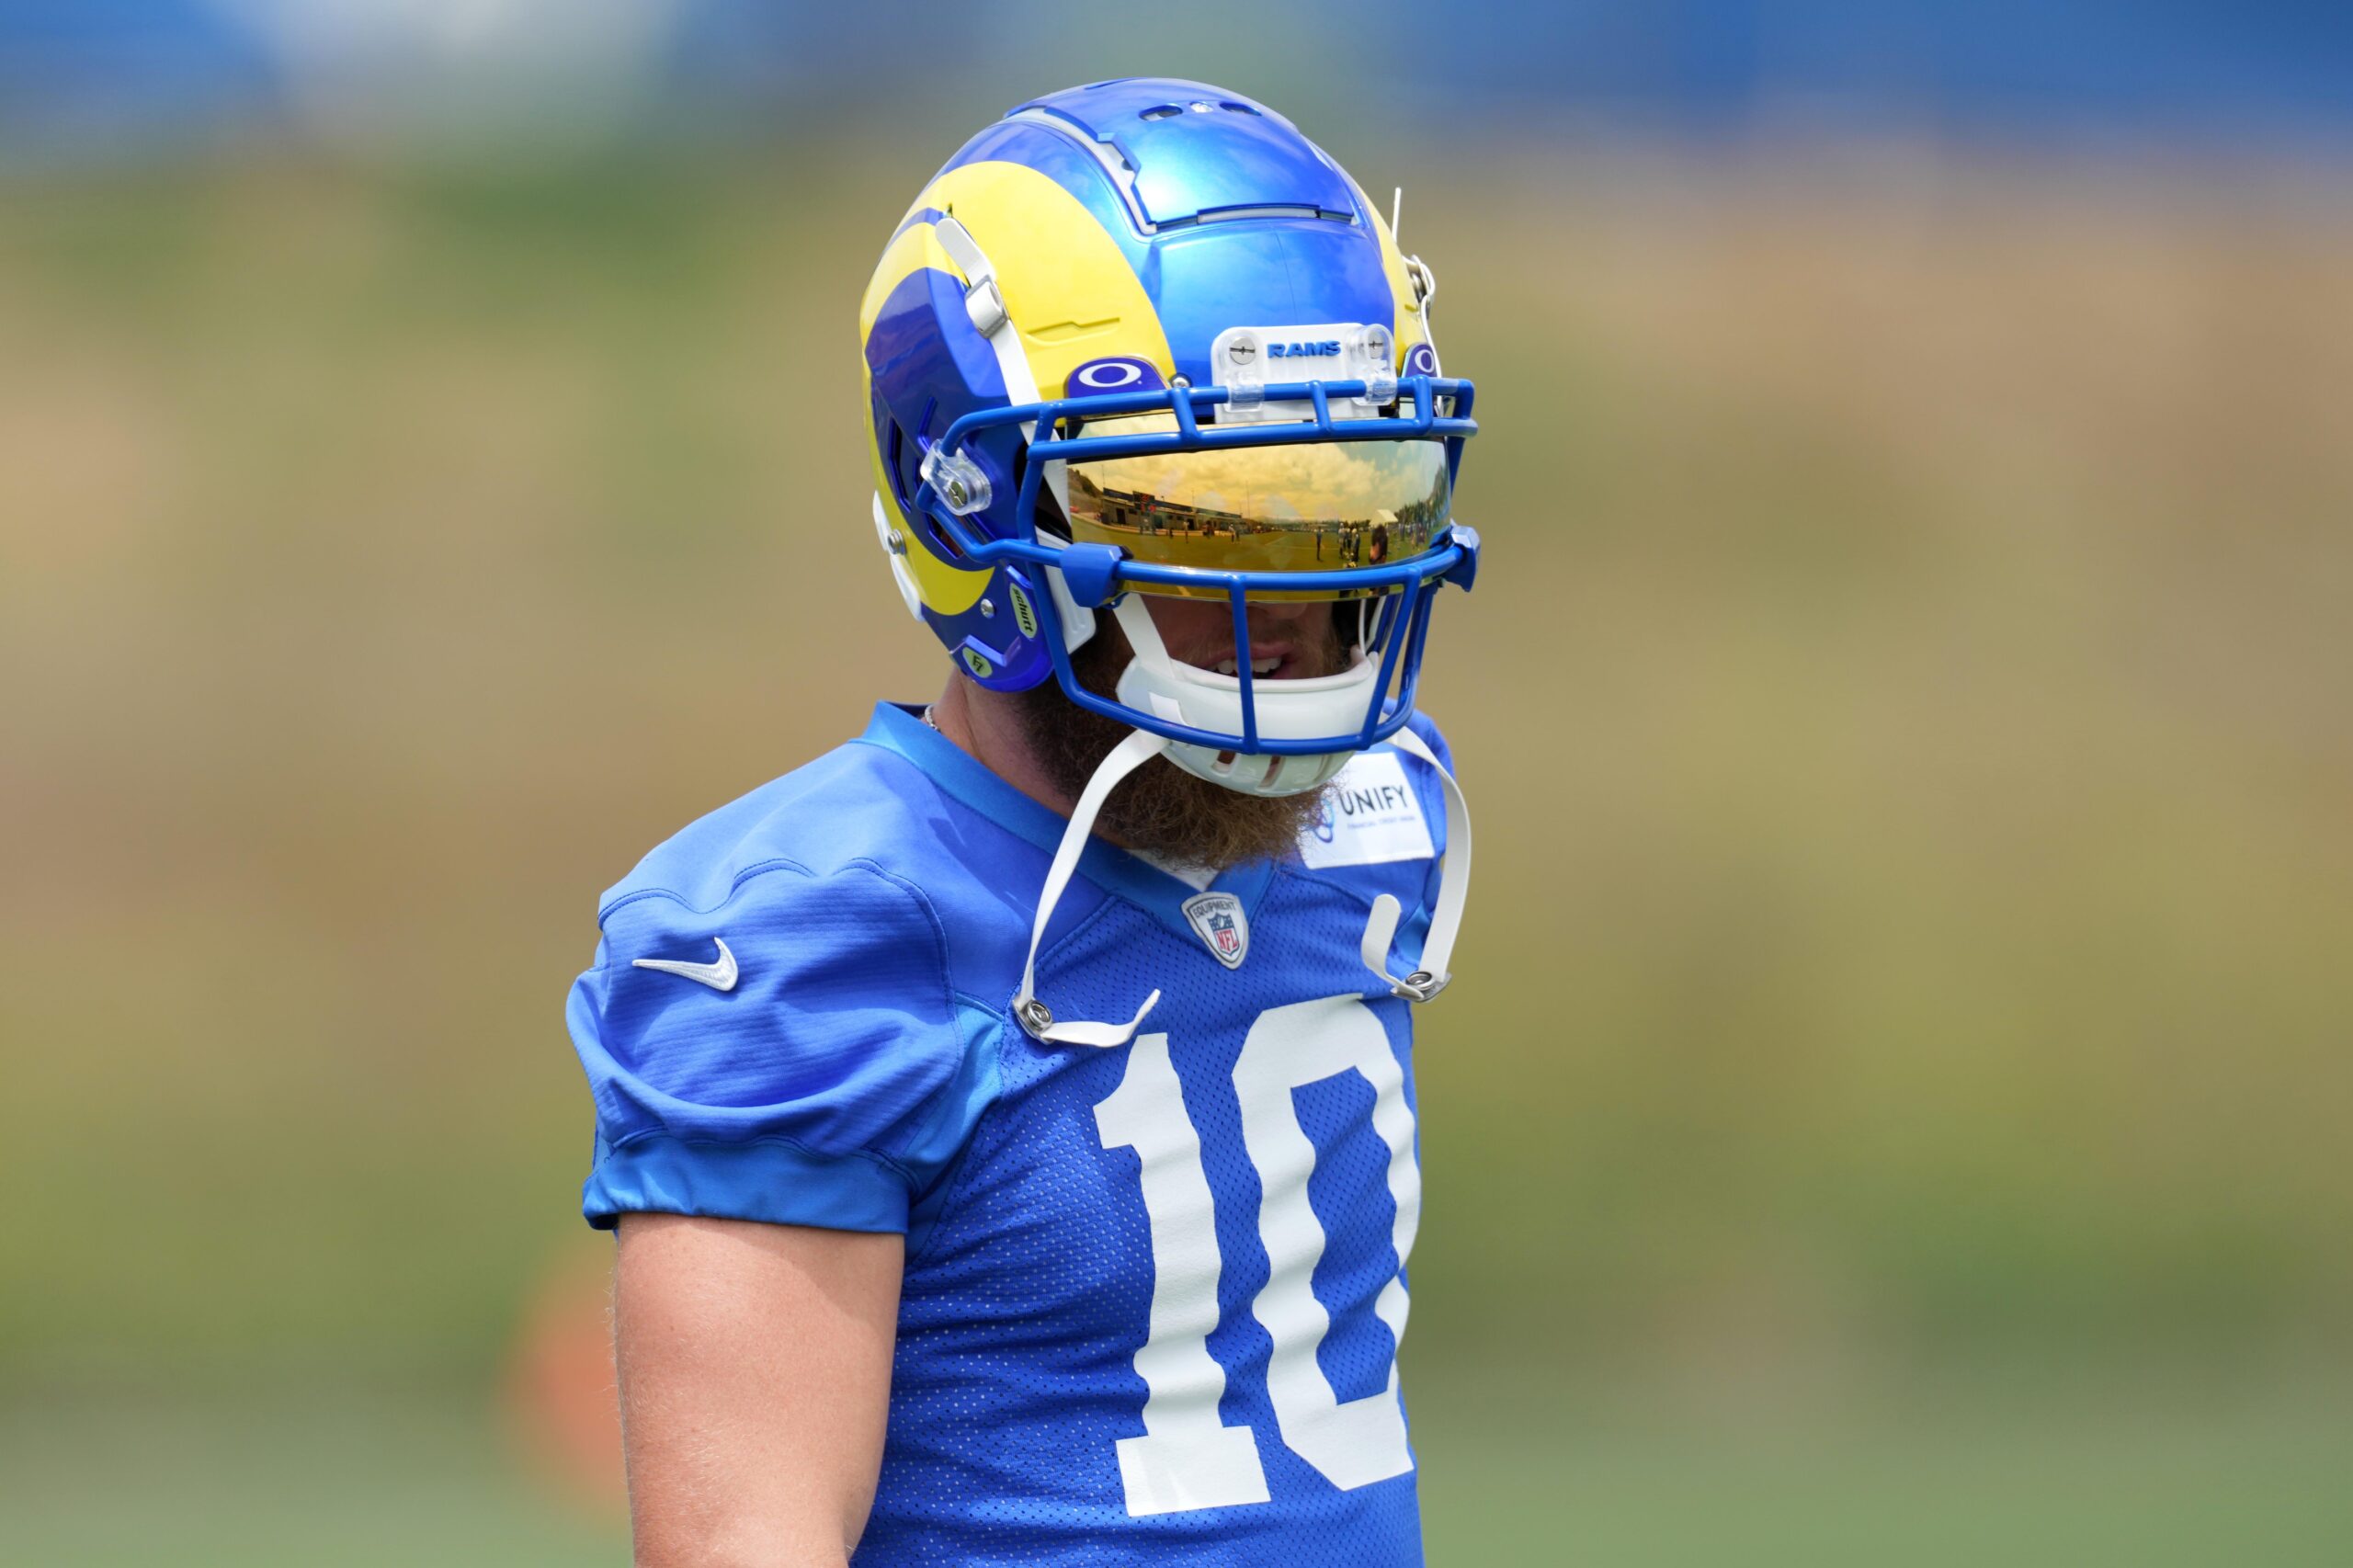 Rams Matthew Stafford returns but is without WR Cooper Kupp - Turf Show  Times